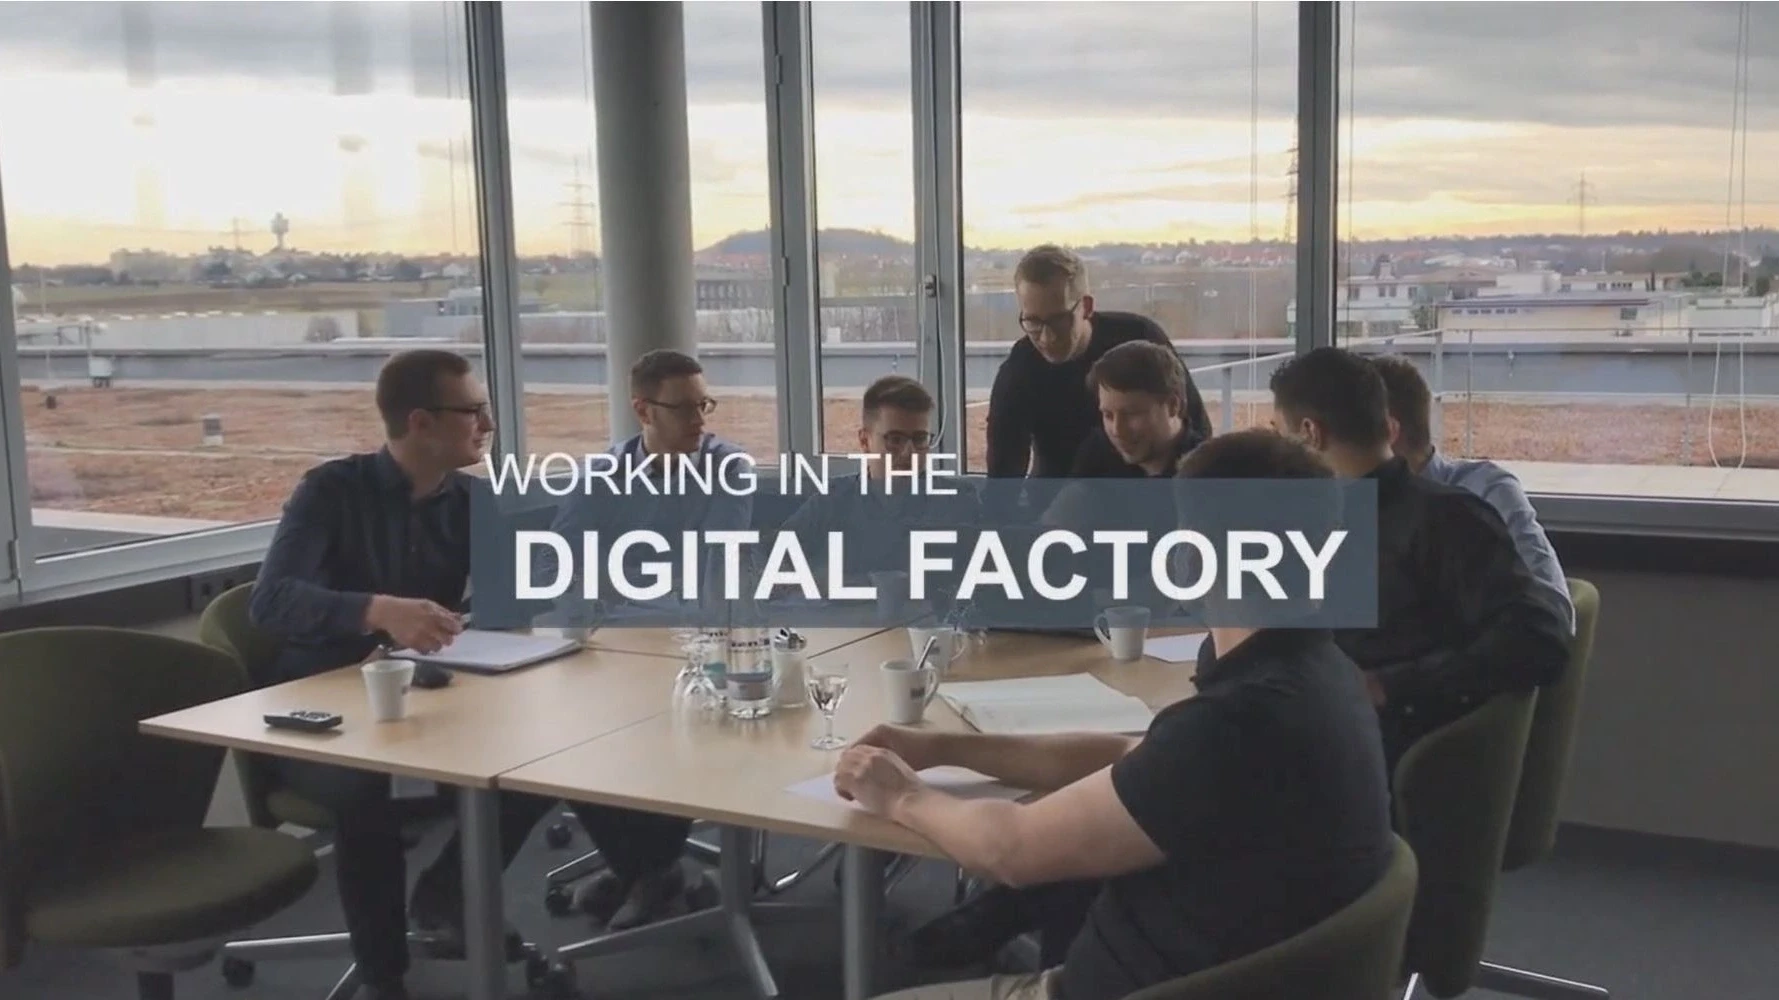 Employees working in the digital factory